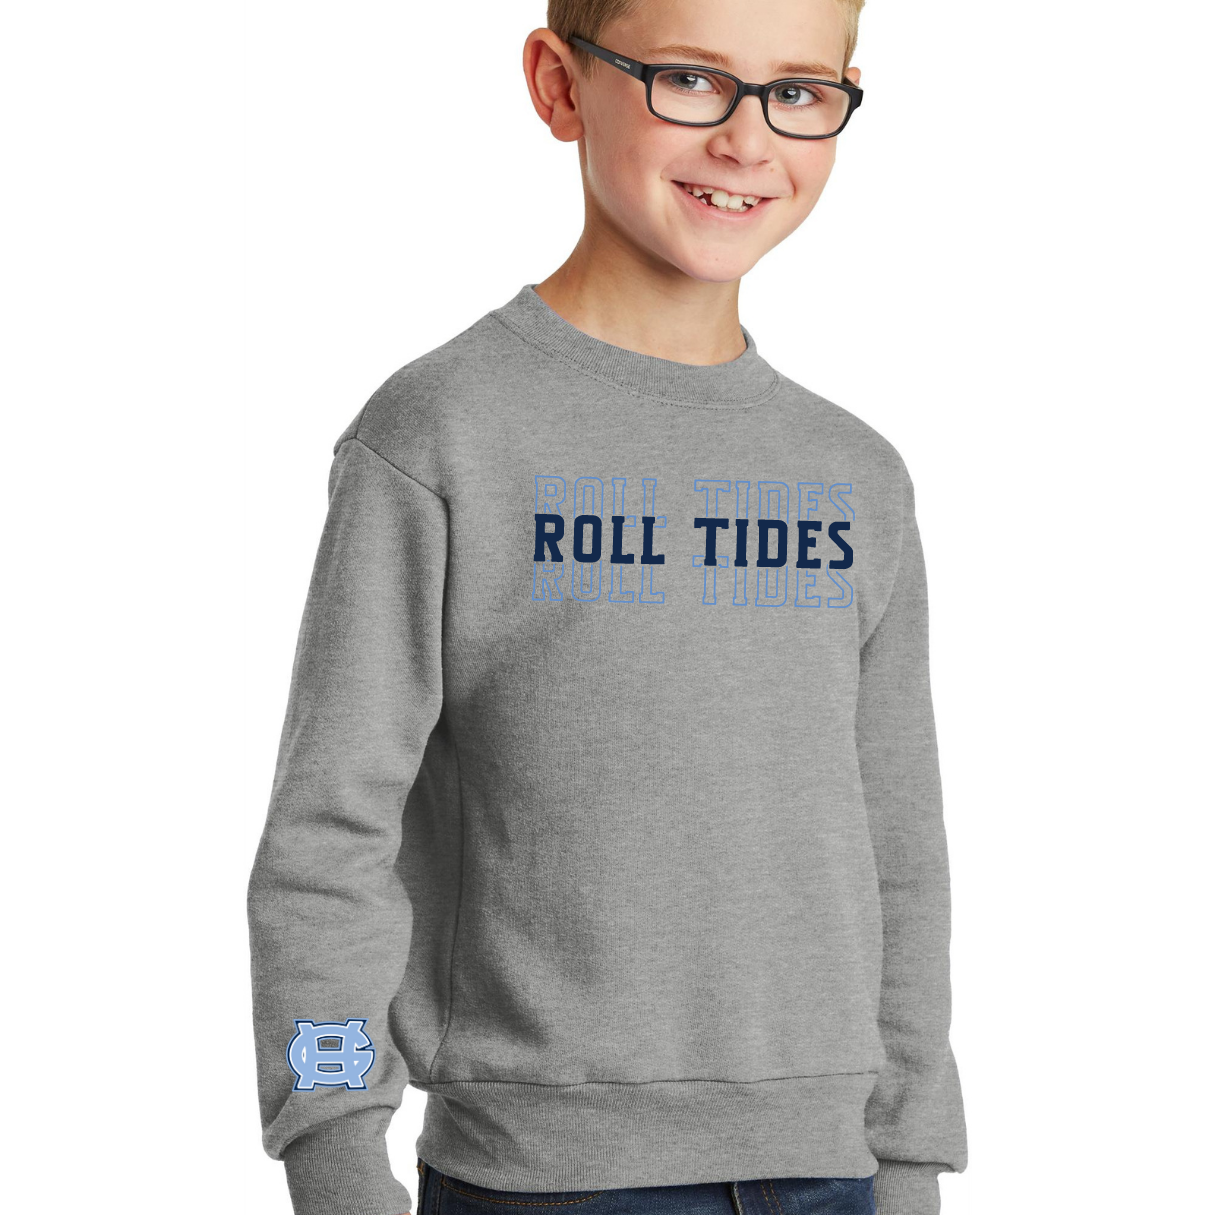 Roll Tides Crewneck Sweatshirt - Adult and Youth